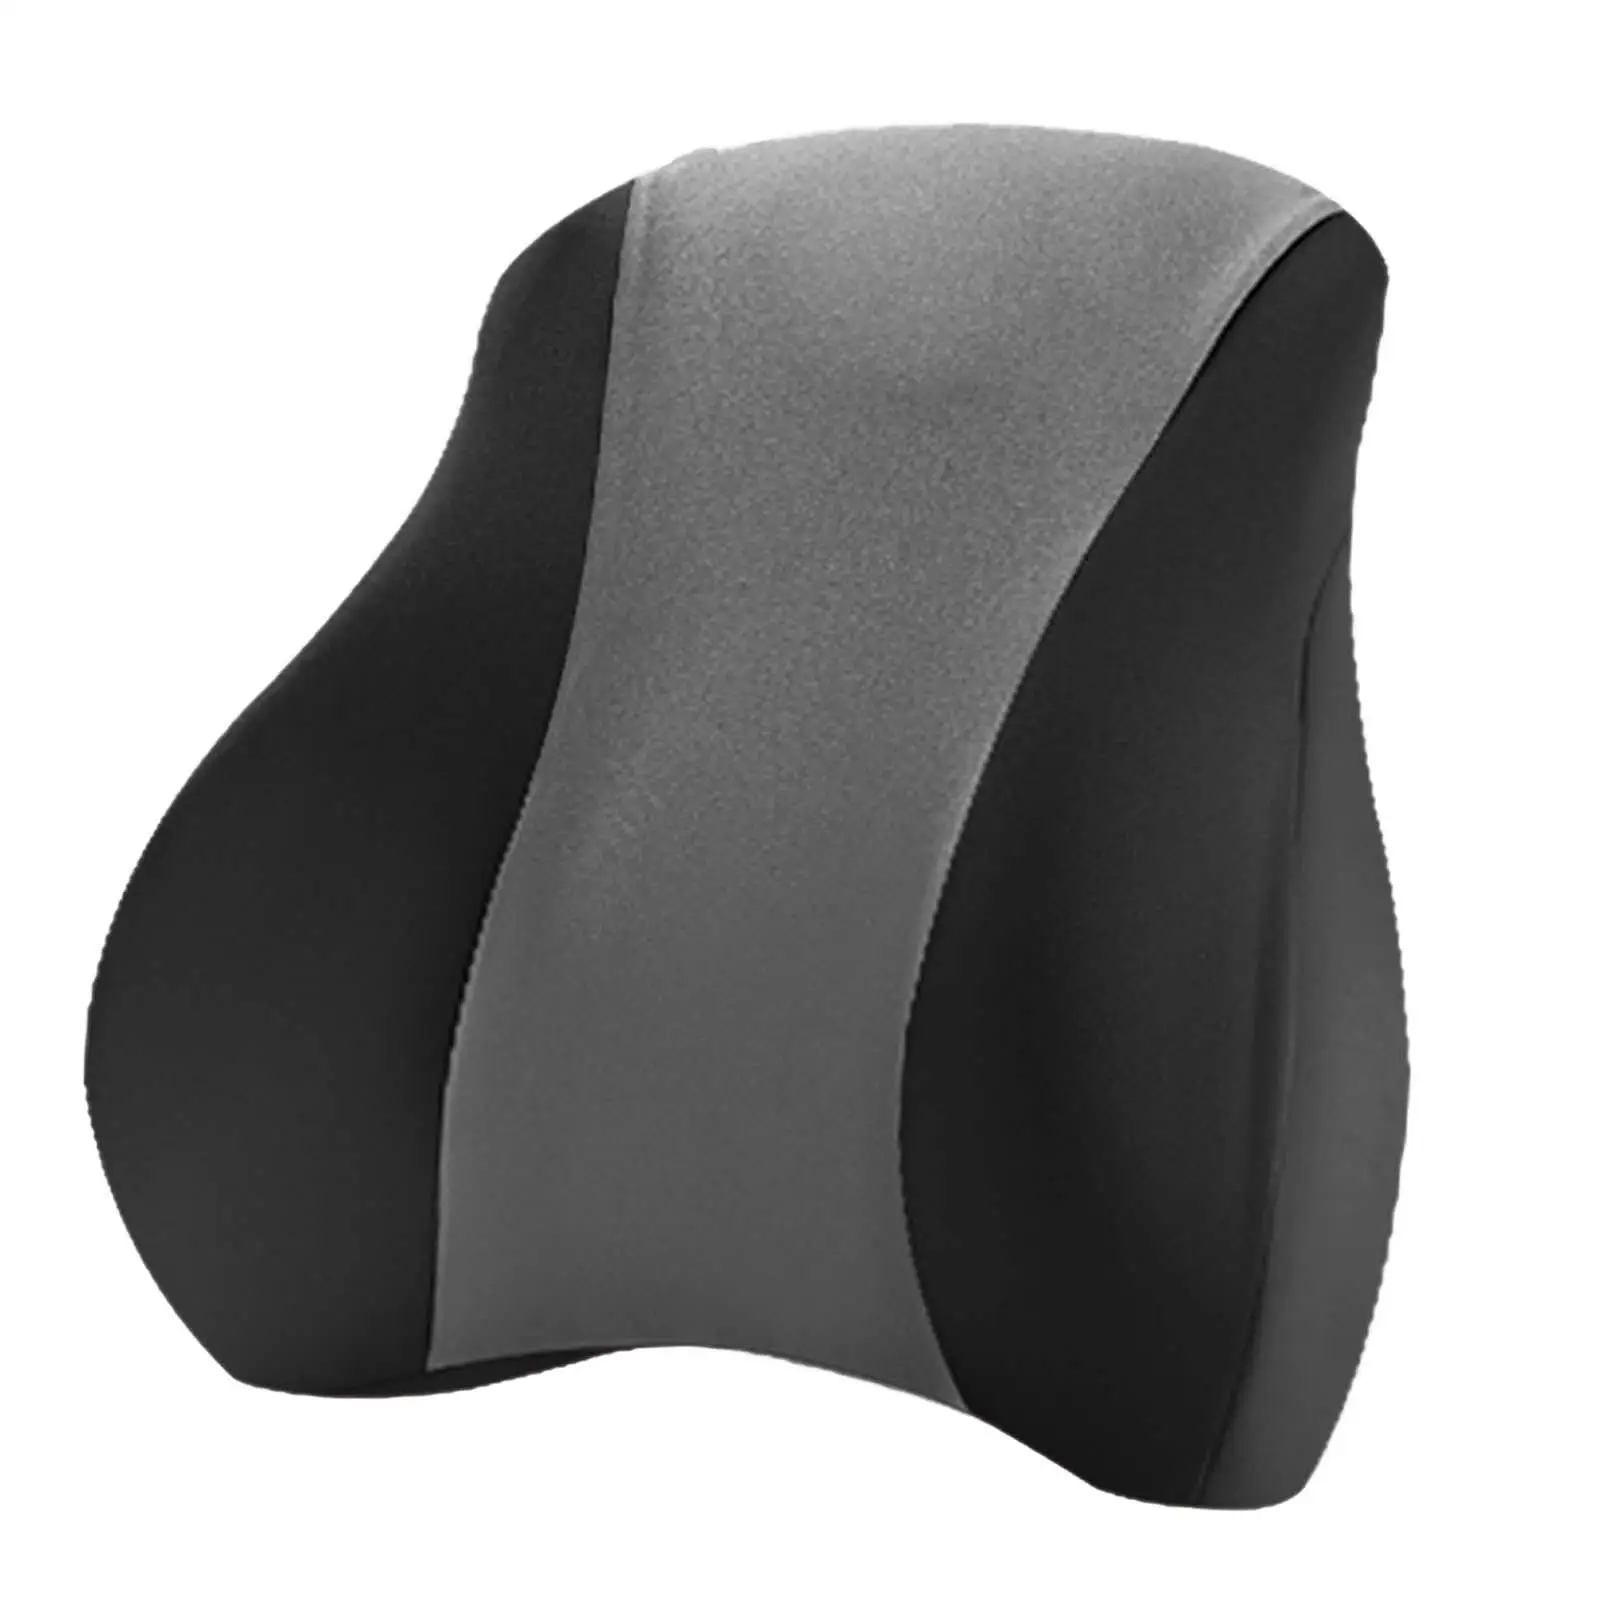 Memory Foam Lumbar Support Pillow for Car with Elastic Strap Car Waist Support for Byd Atto 3 Yuan Plus Seat Accessories